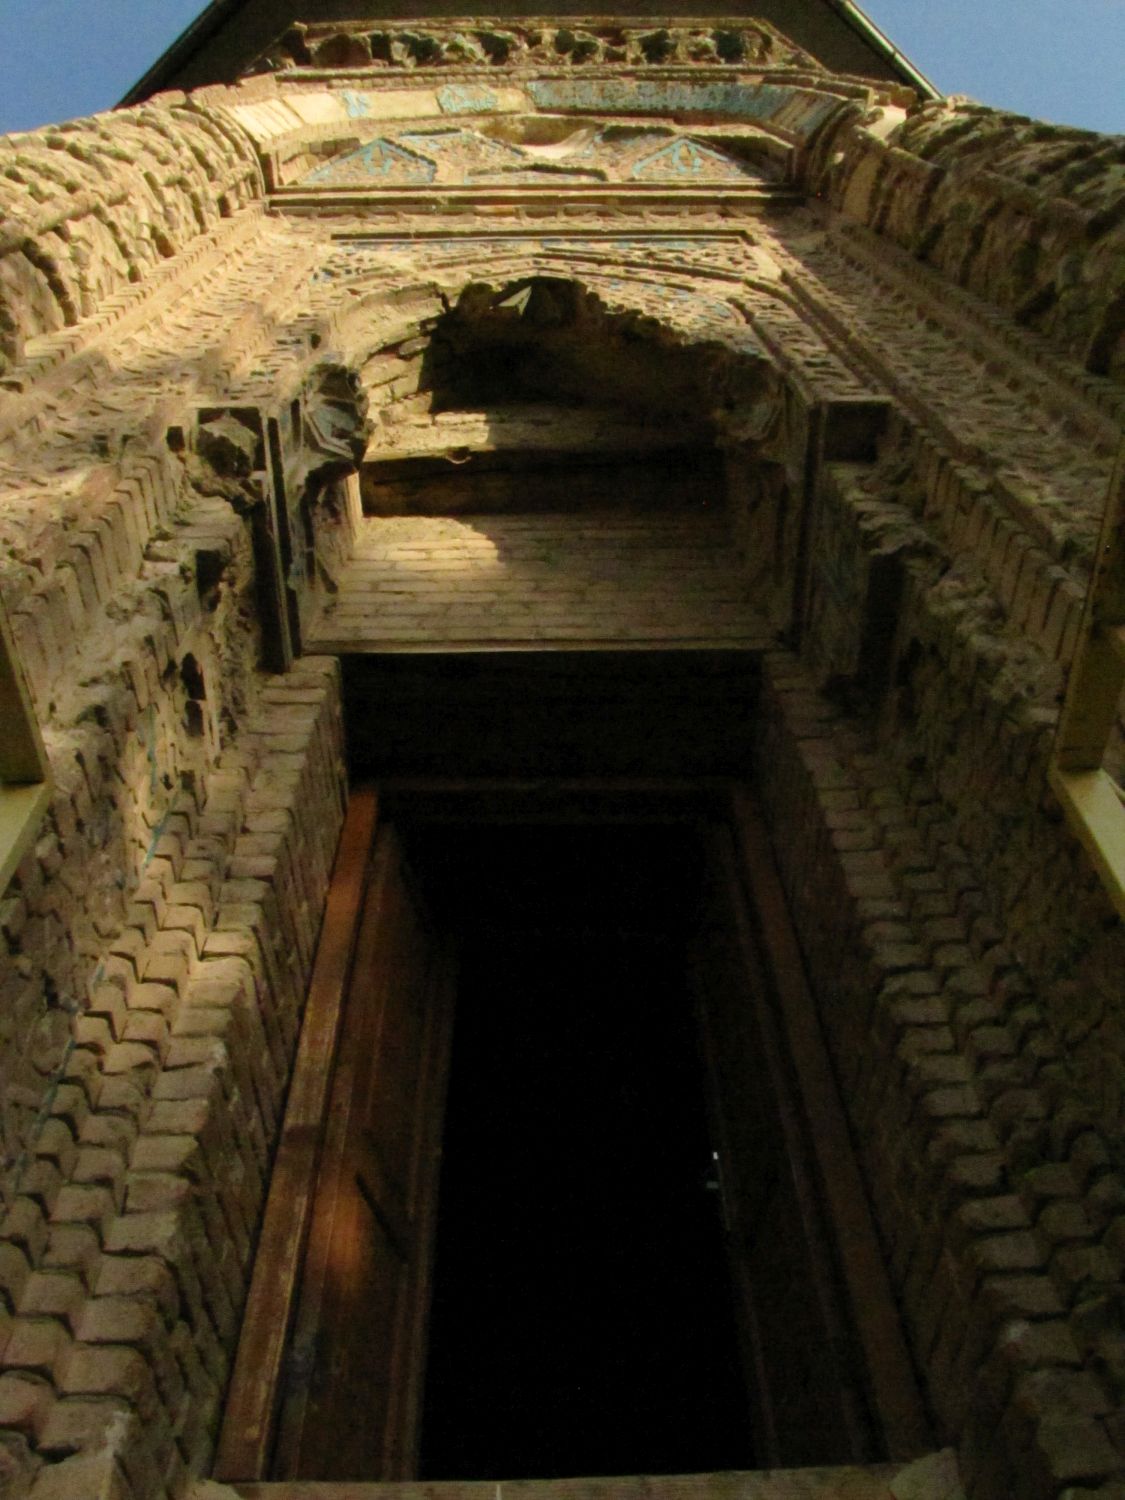 Exterior view up at doorway and top of portal, with damaged muqarnas, partially glazed tiles and brickwork